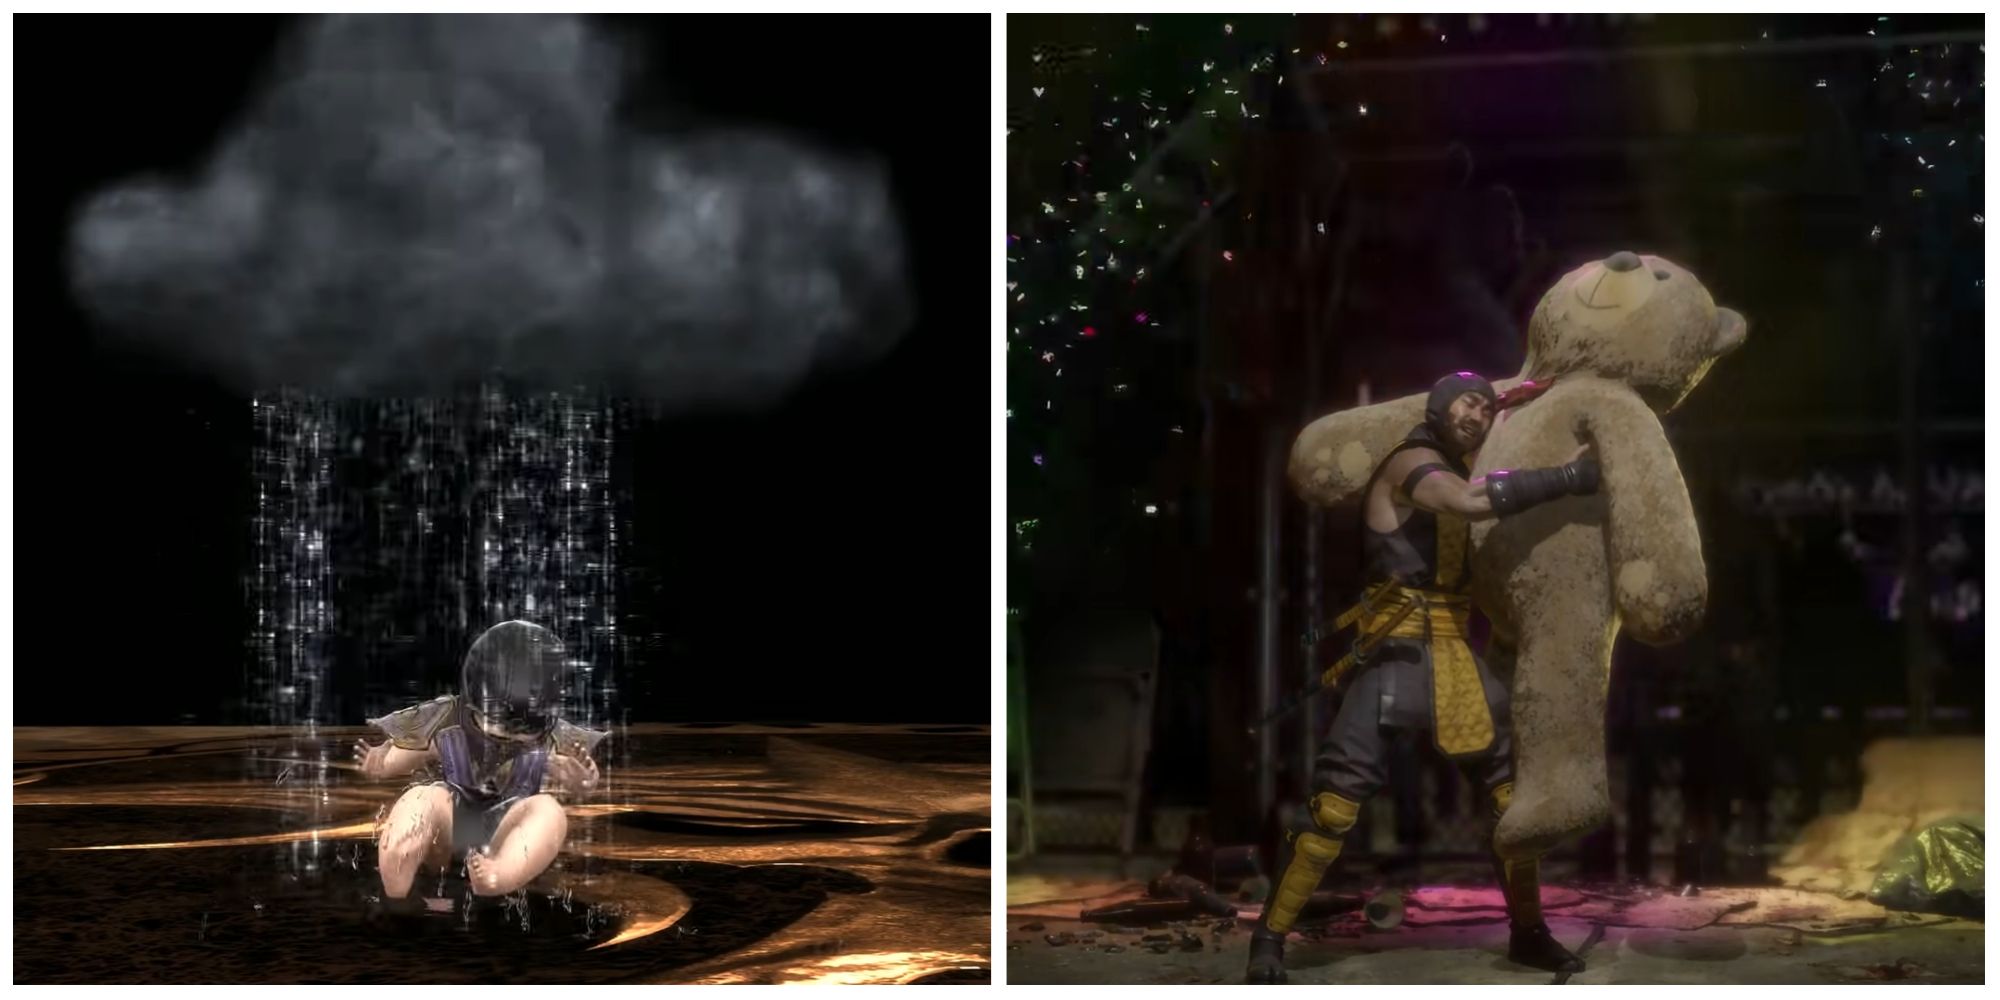 A babality from Mortal Kombat 9 featuring Rain and a friendship from MK11 featuring Scorpion.